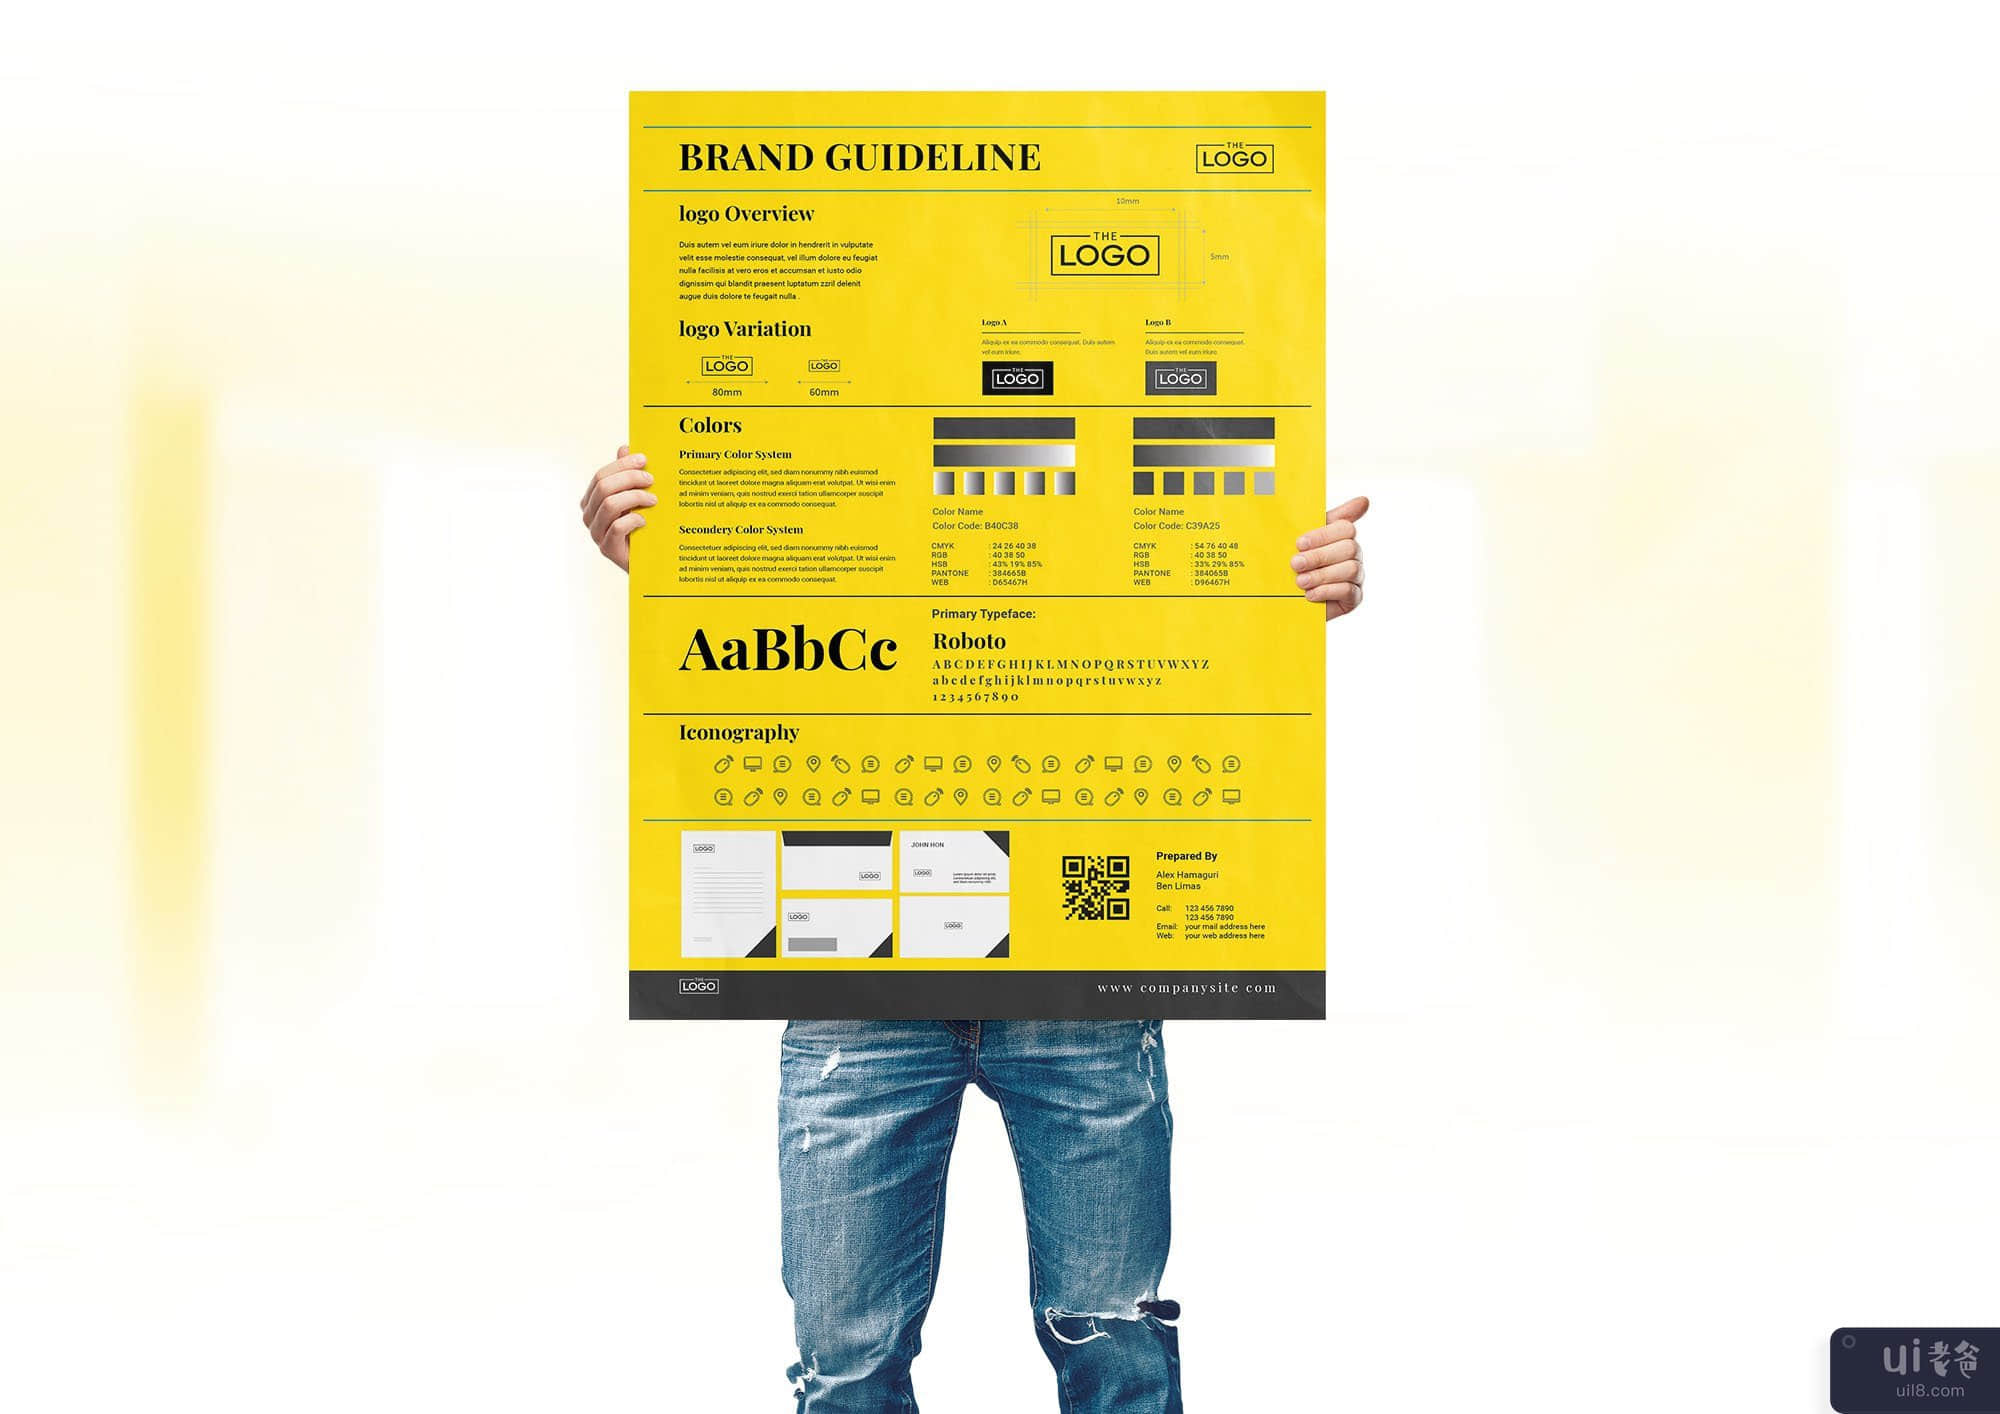 A3 品牌指南海报 Din A3 品牌指南海报(A3 Brand Guideline poster Din A3 Brand Guideline poster)插图5